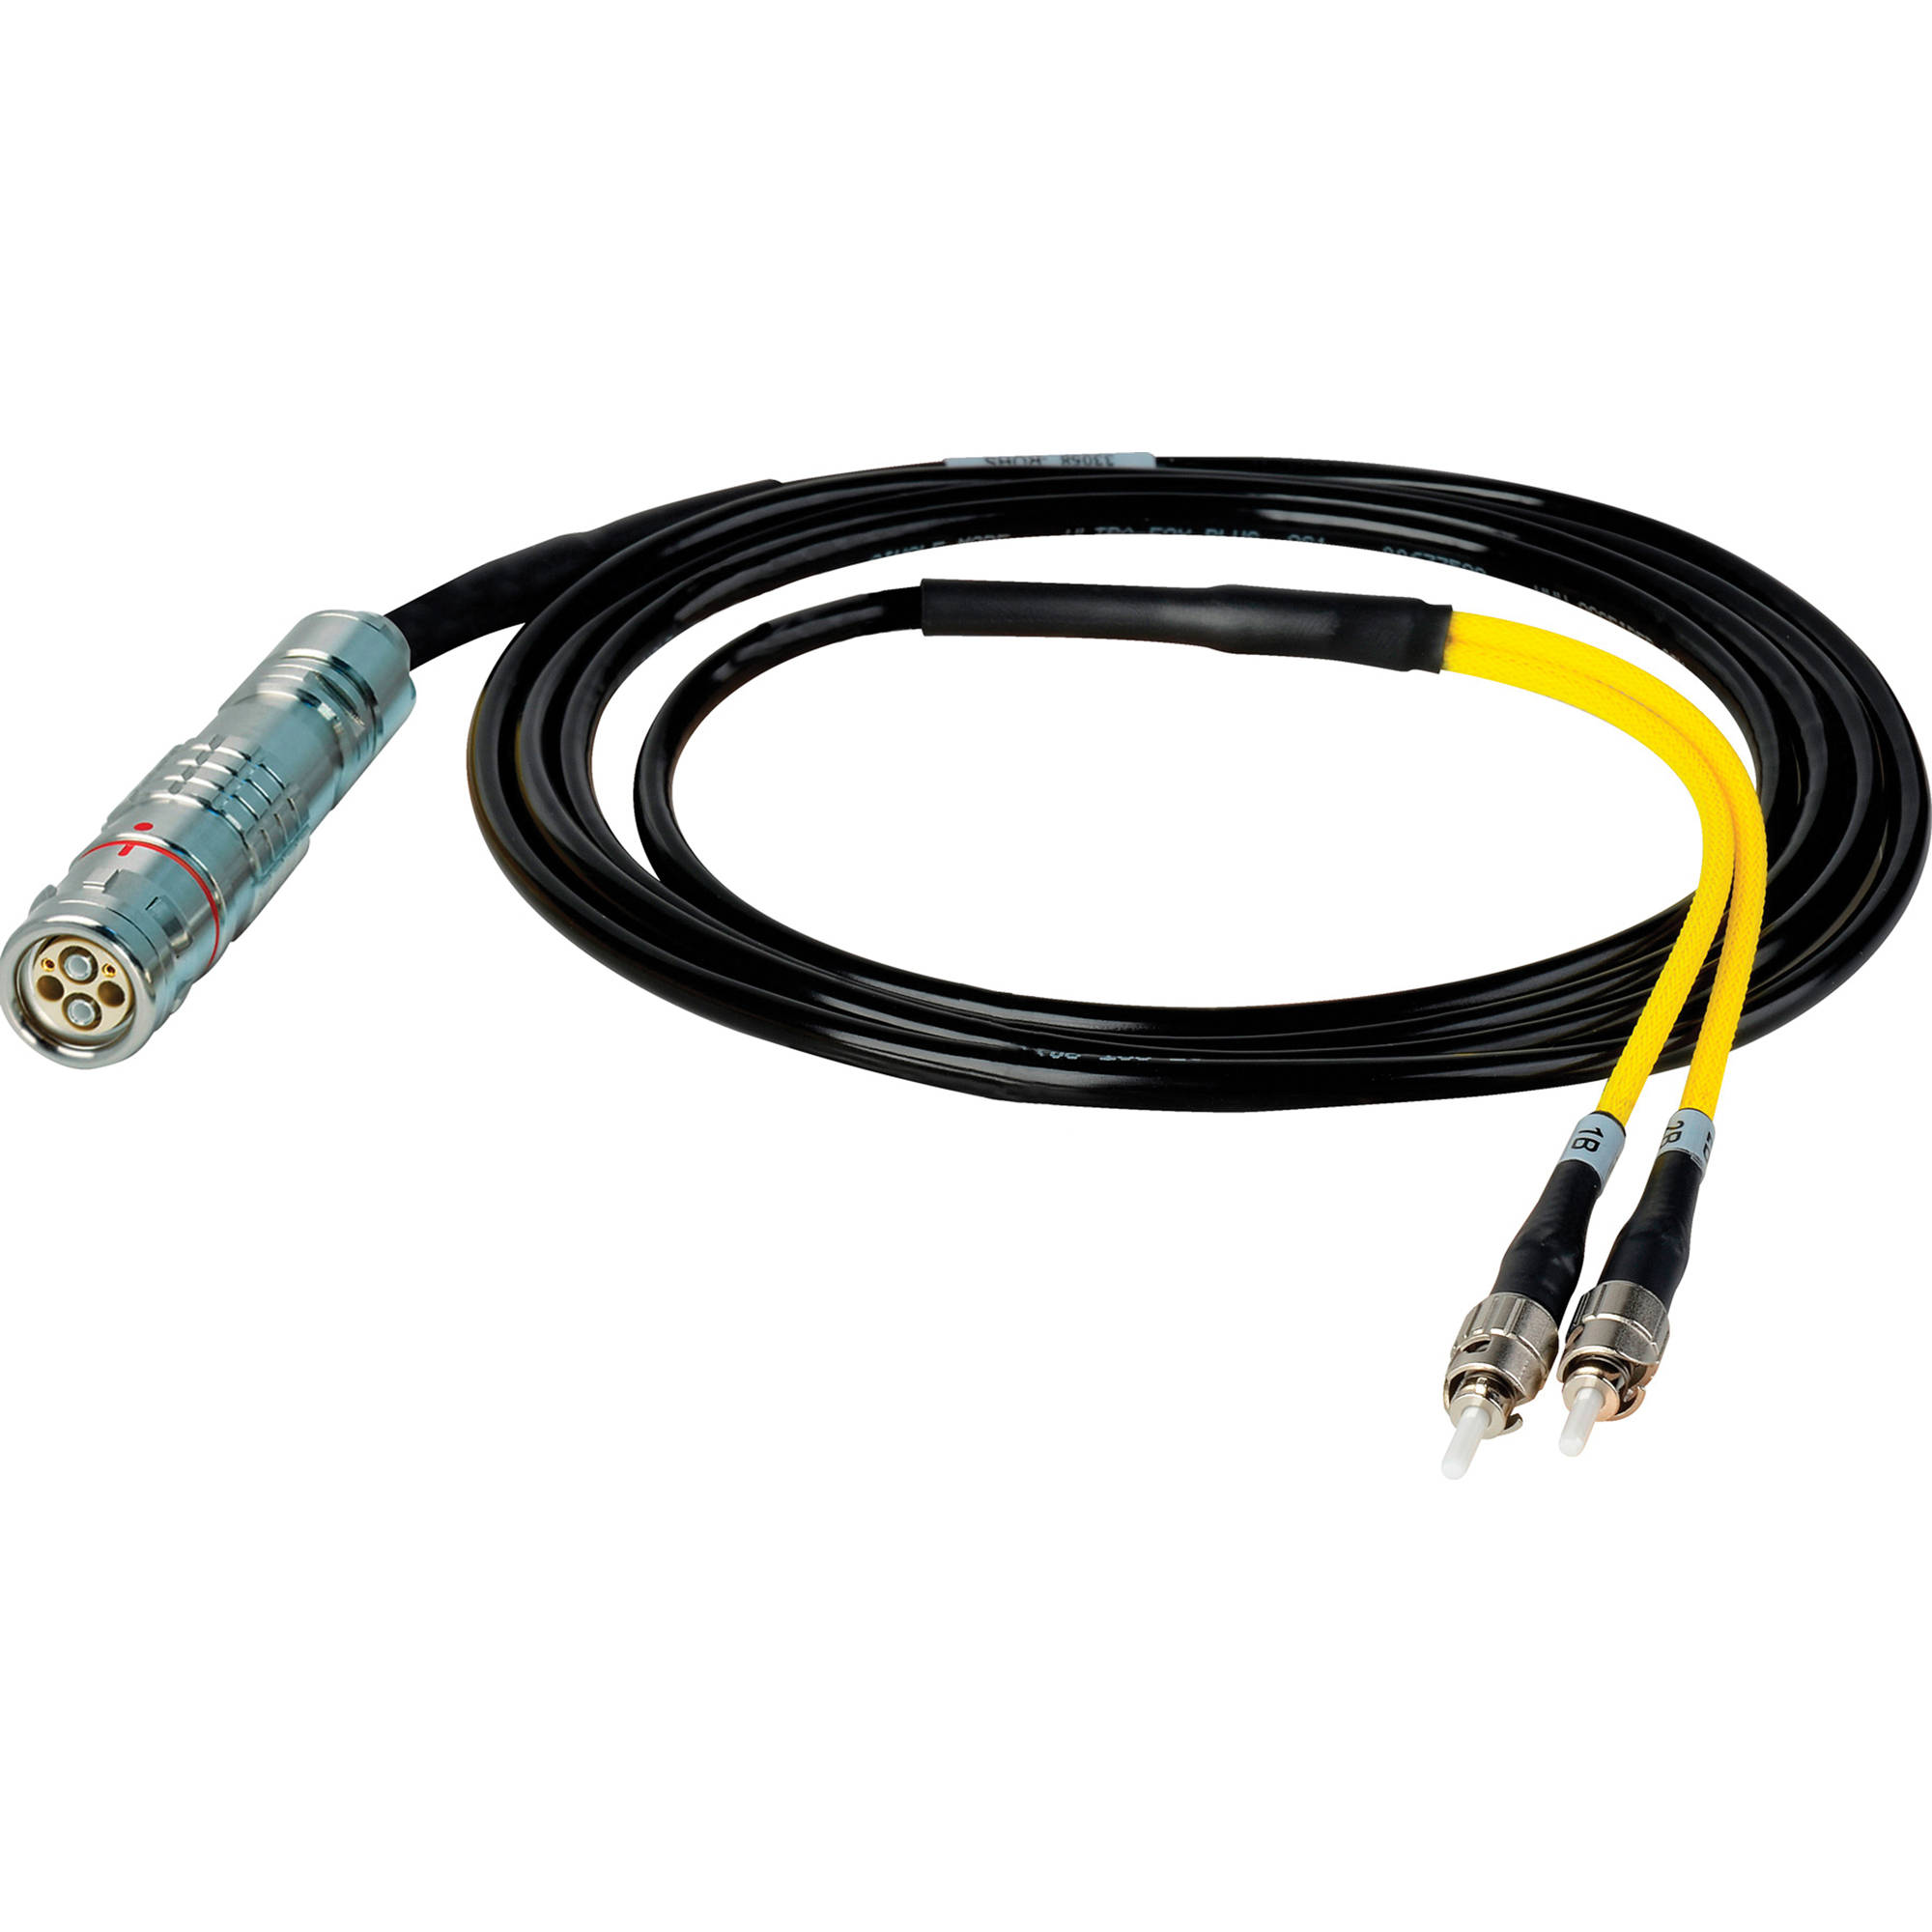 Camplex LEMO FUW to Dual ST In-Line Fiber Optic Breakout Cable - 35 Foot